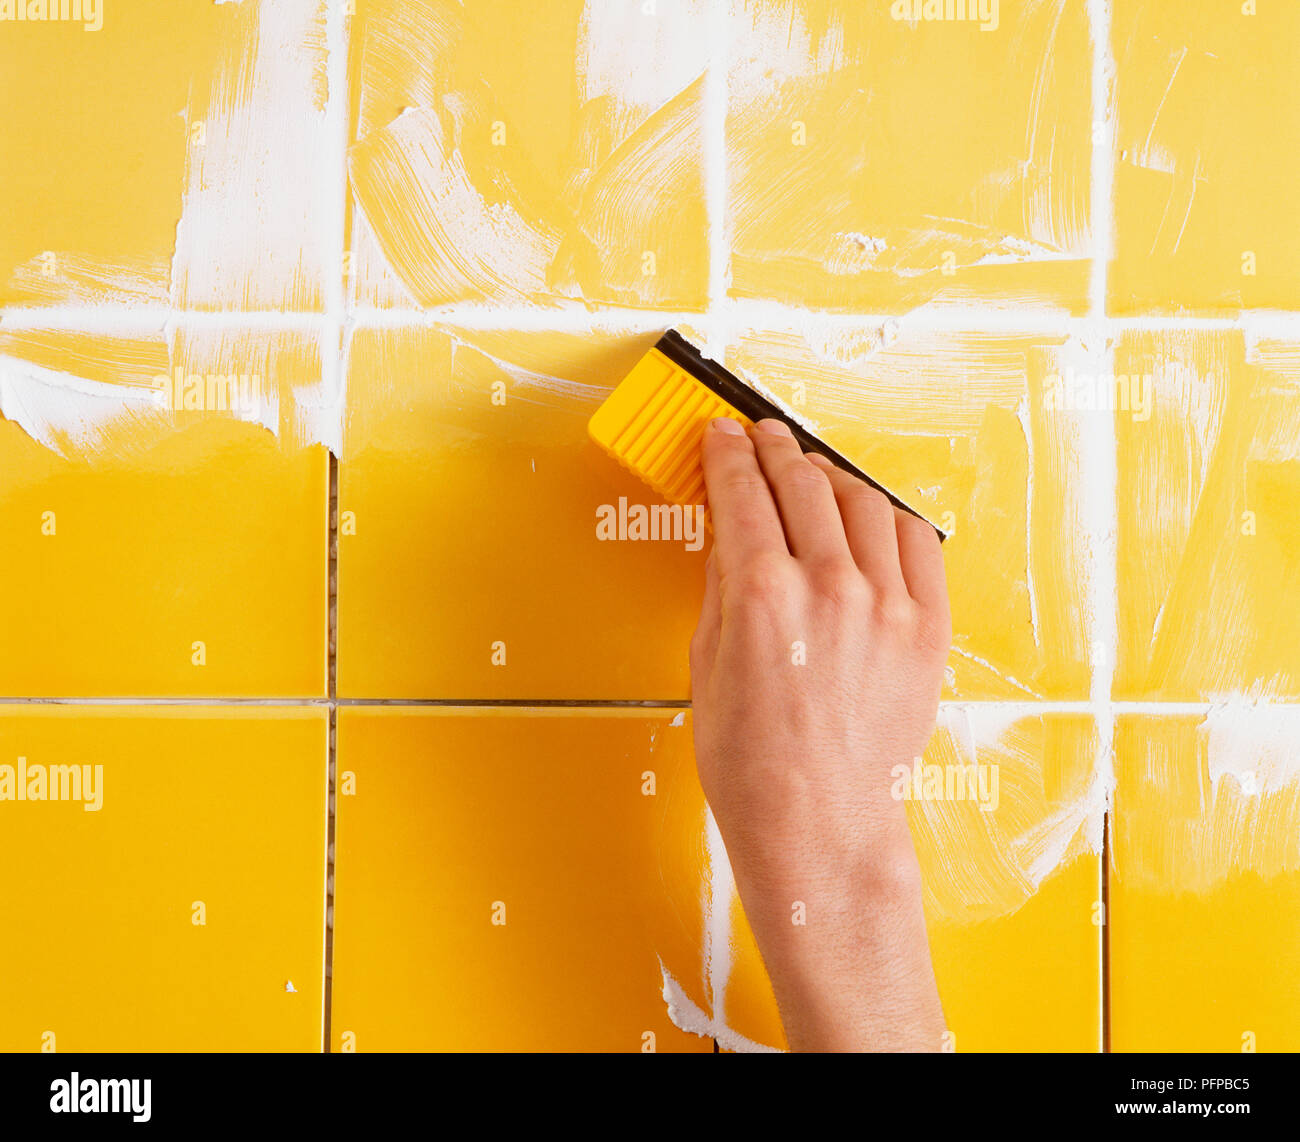 Grout being applied to tiles using a grout spreader Stock Photo